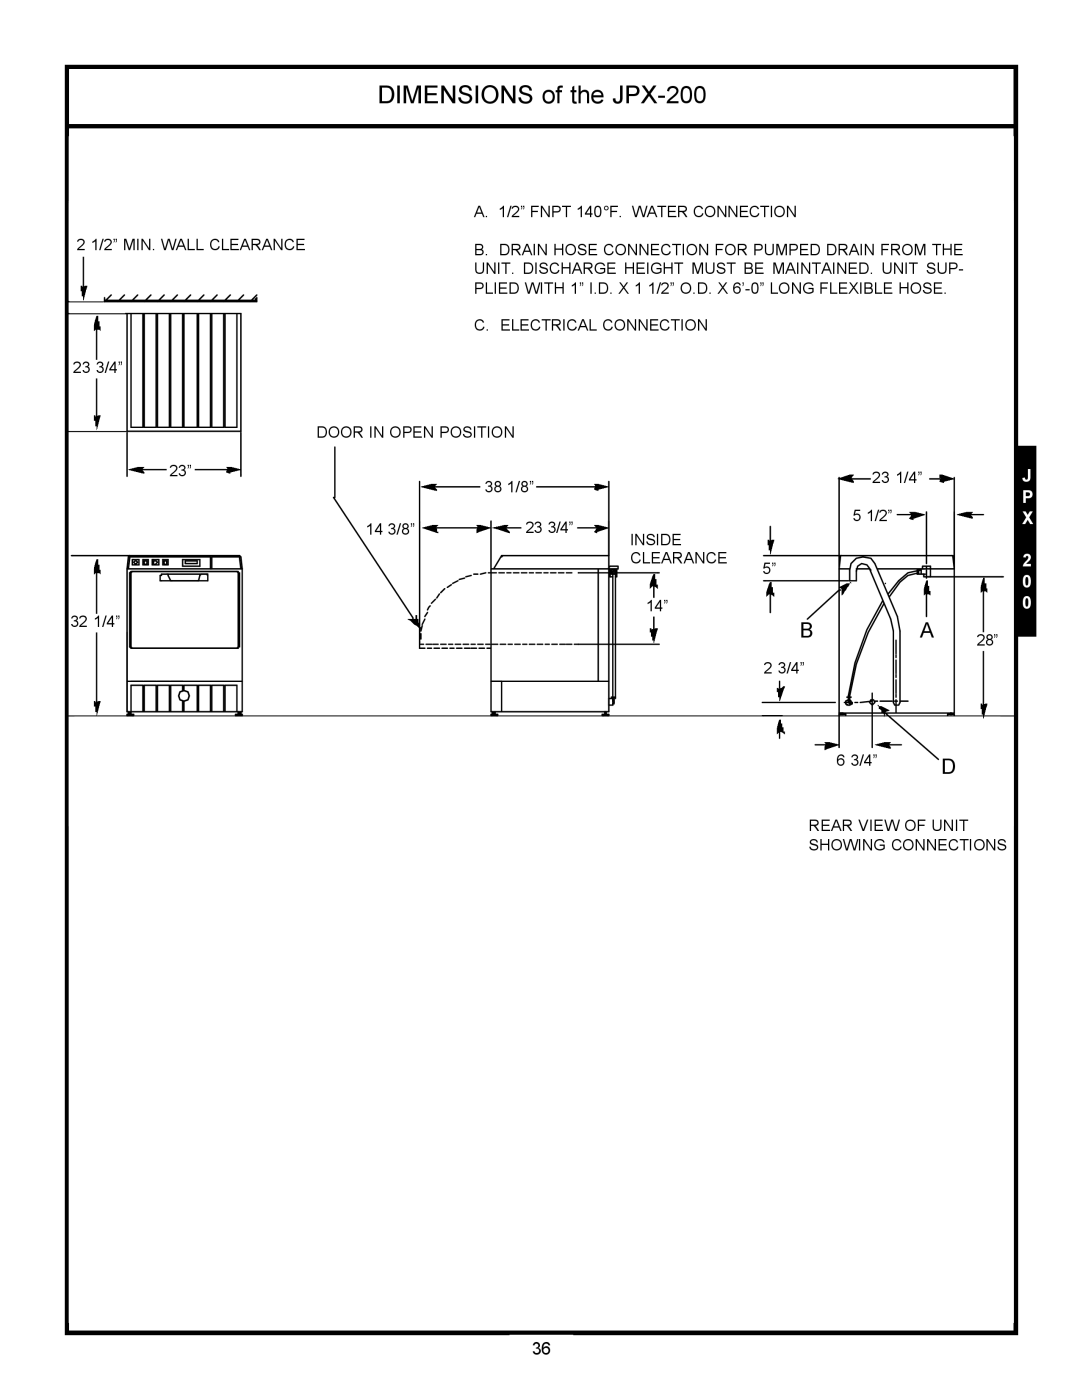 Jackson JPX-160, jpx-140 service manual DIMENSIONS of the JPX-200, 3/4” 